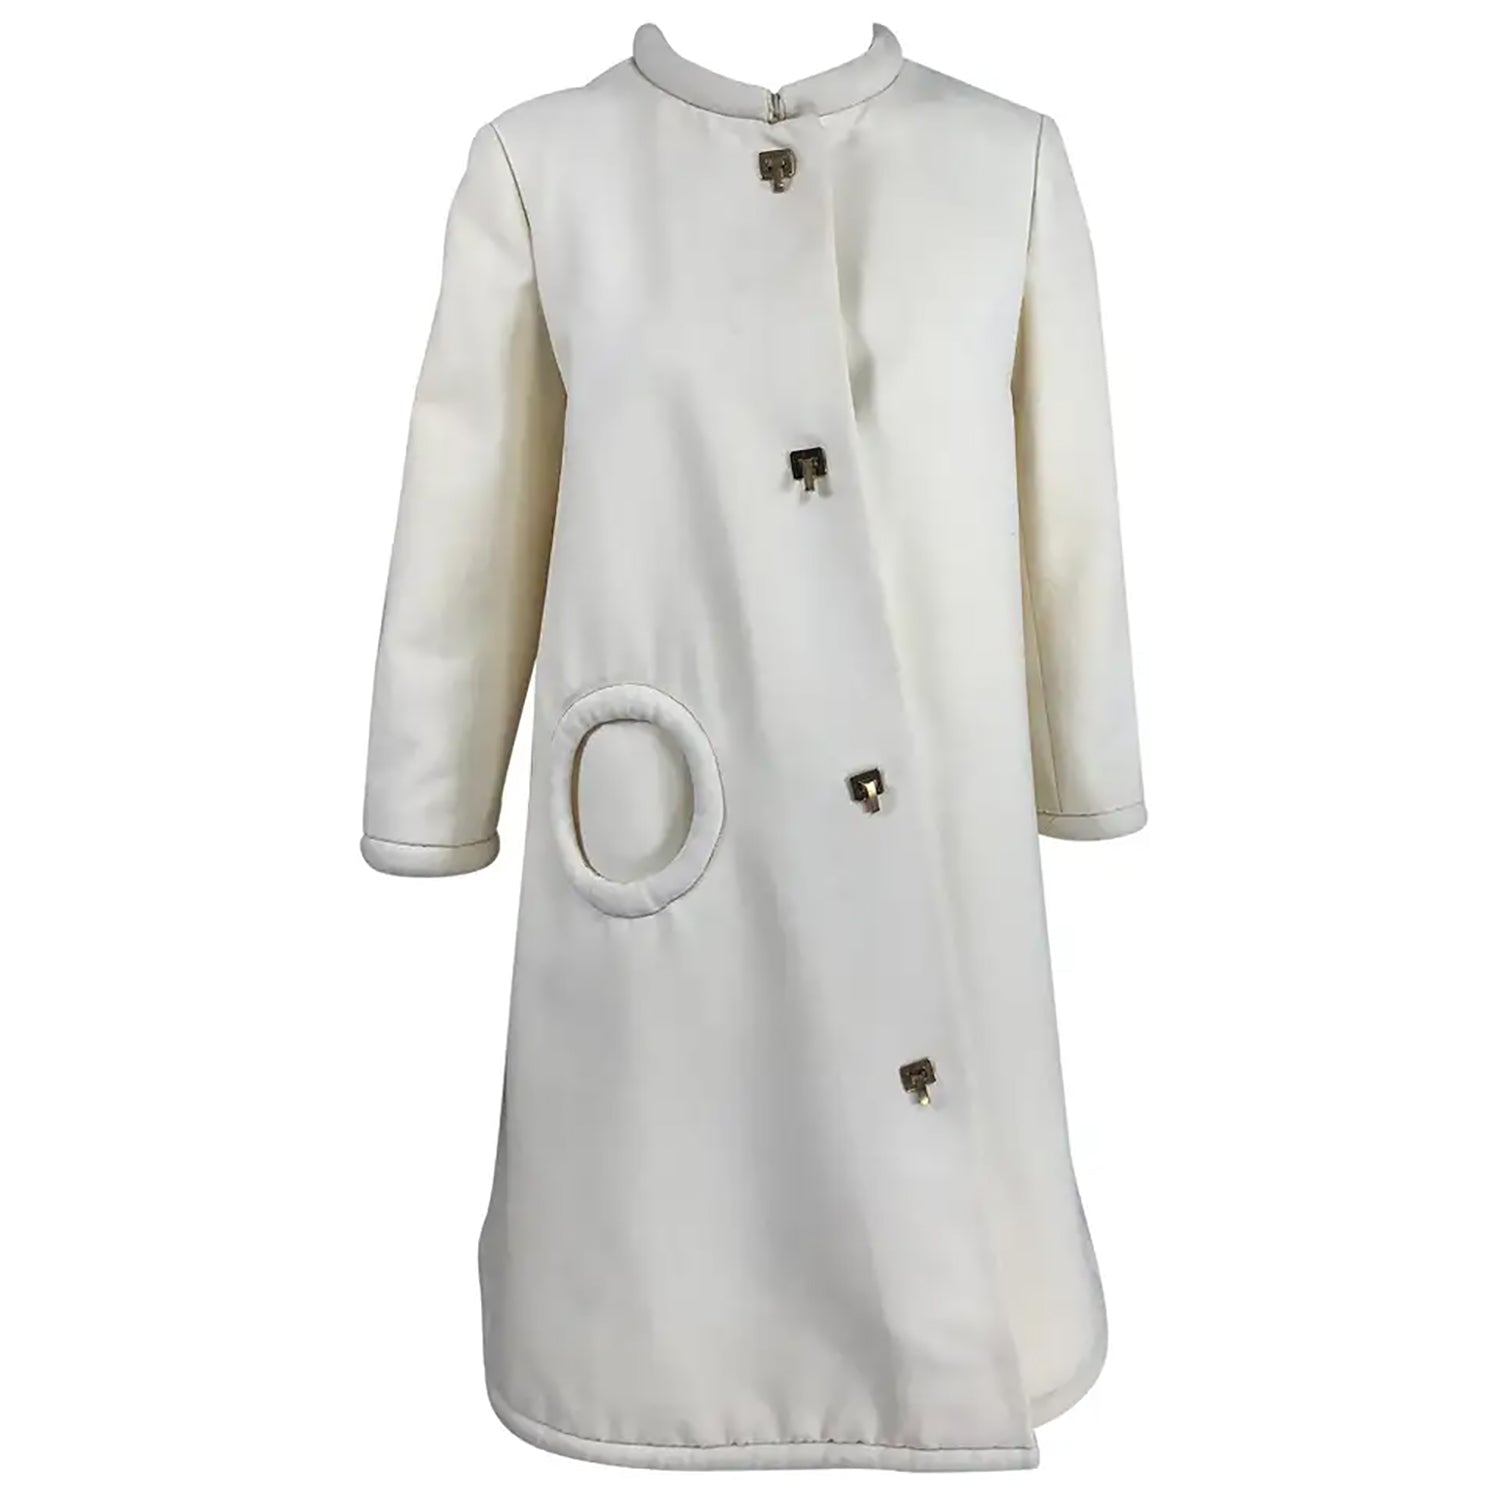 Circl Metal Off Clasps Toggle – with Cardin Wool Pierre Coat 1960s White Palm Beach Vintage